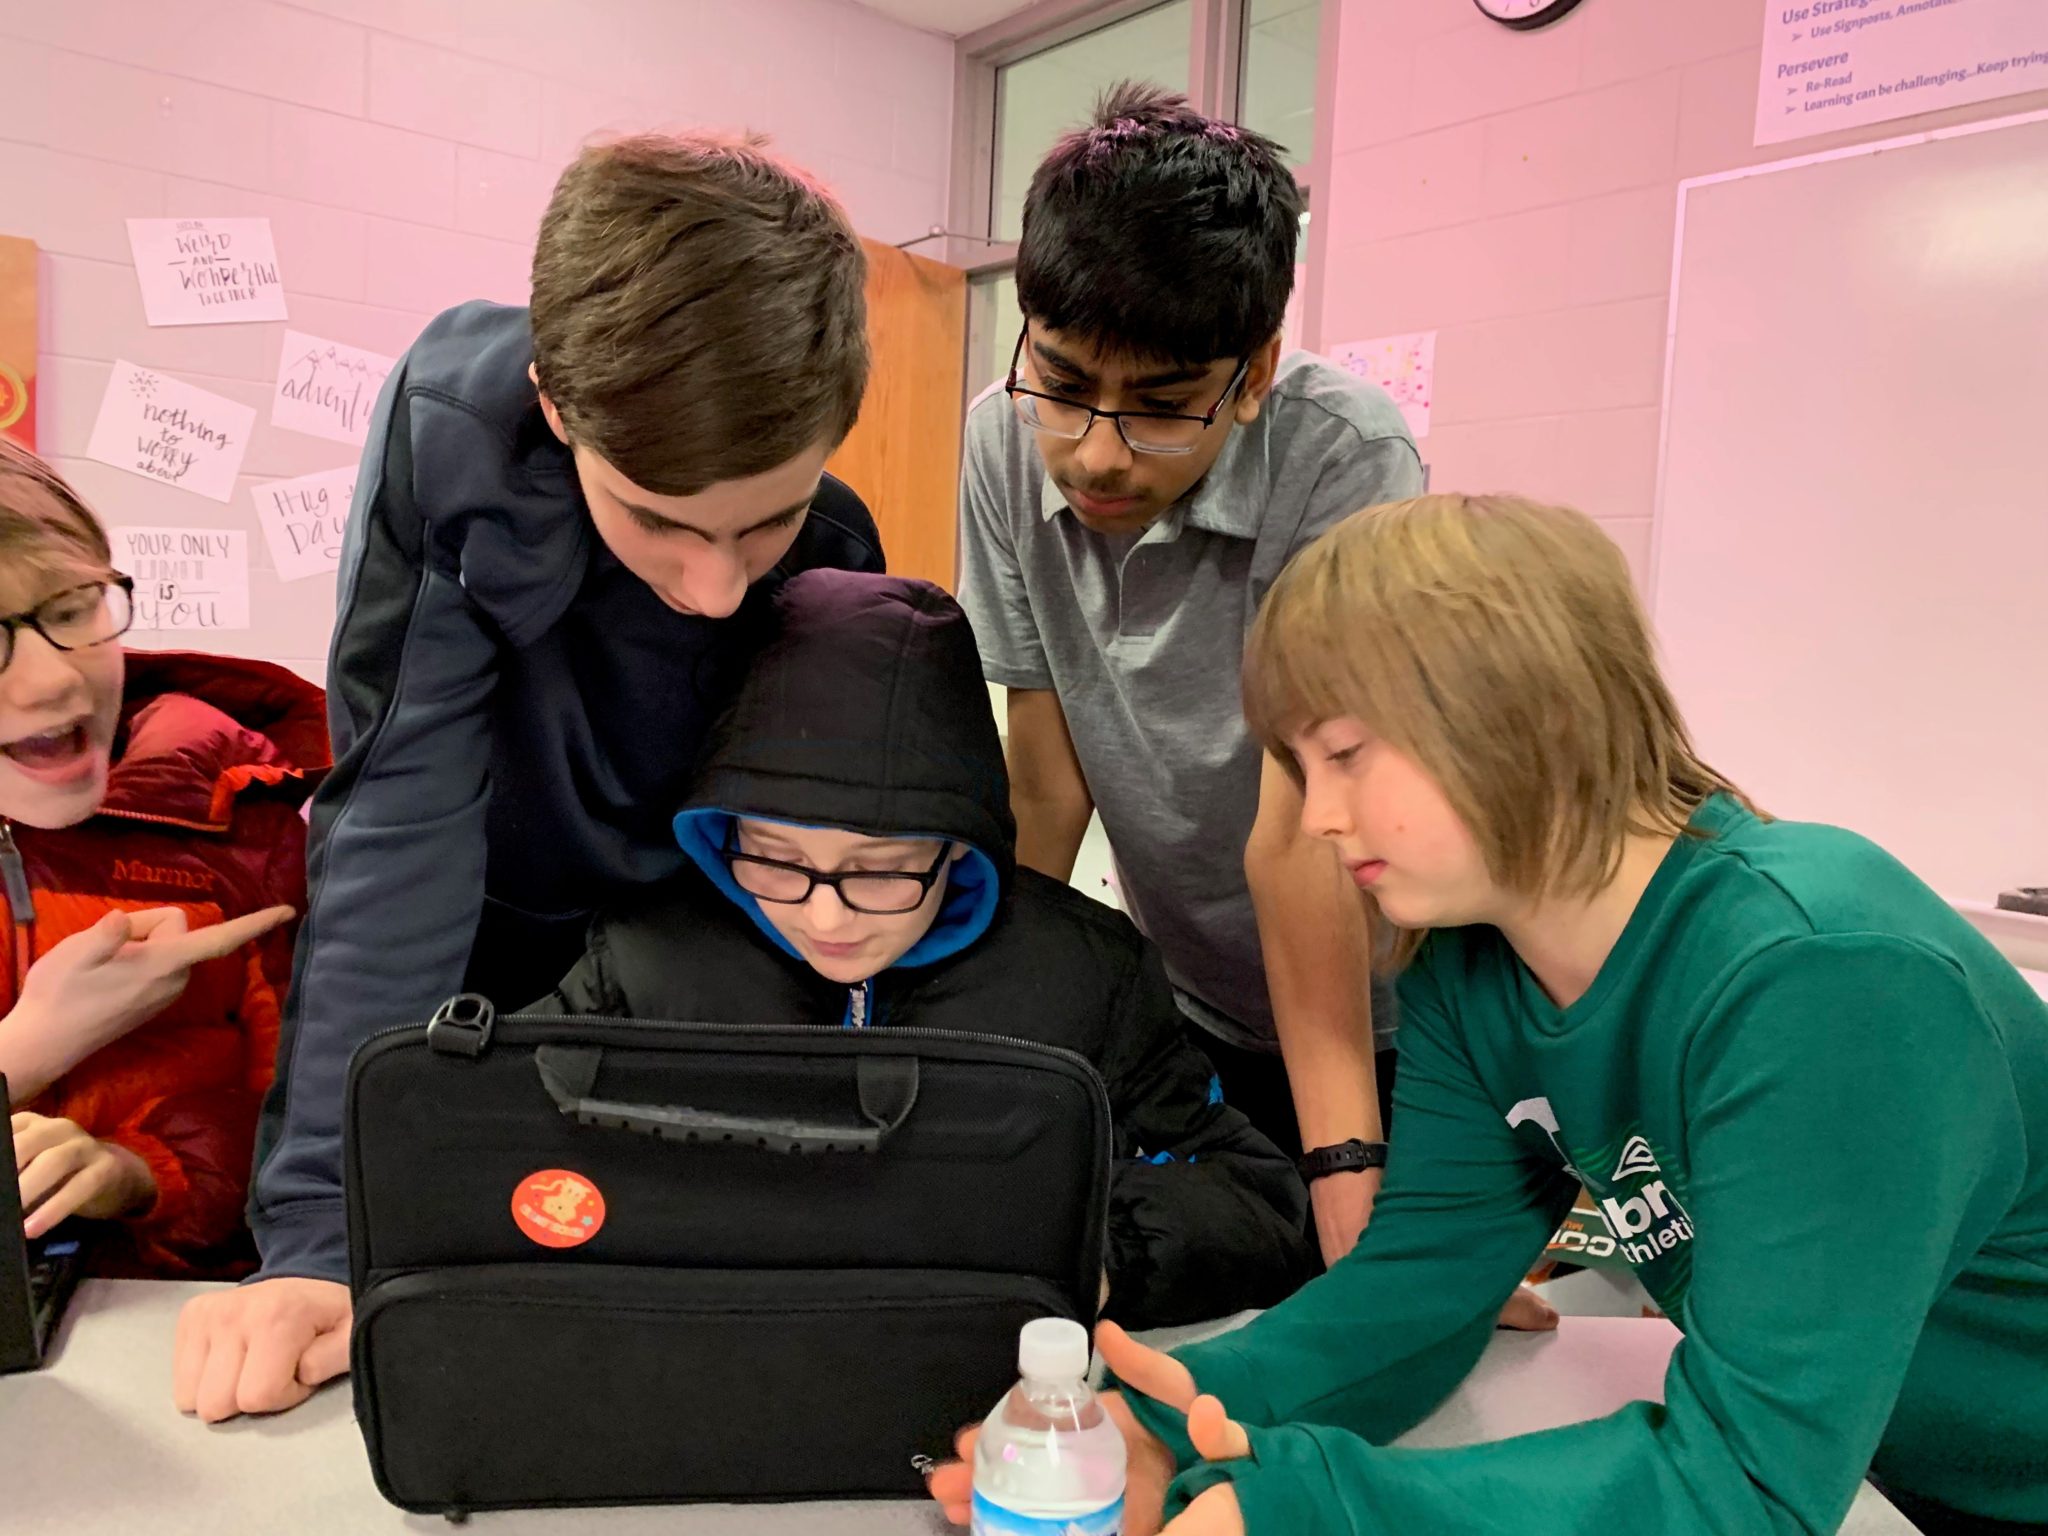 Four students work together at a laptop computer.